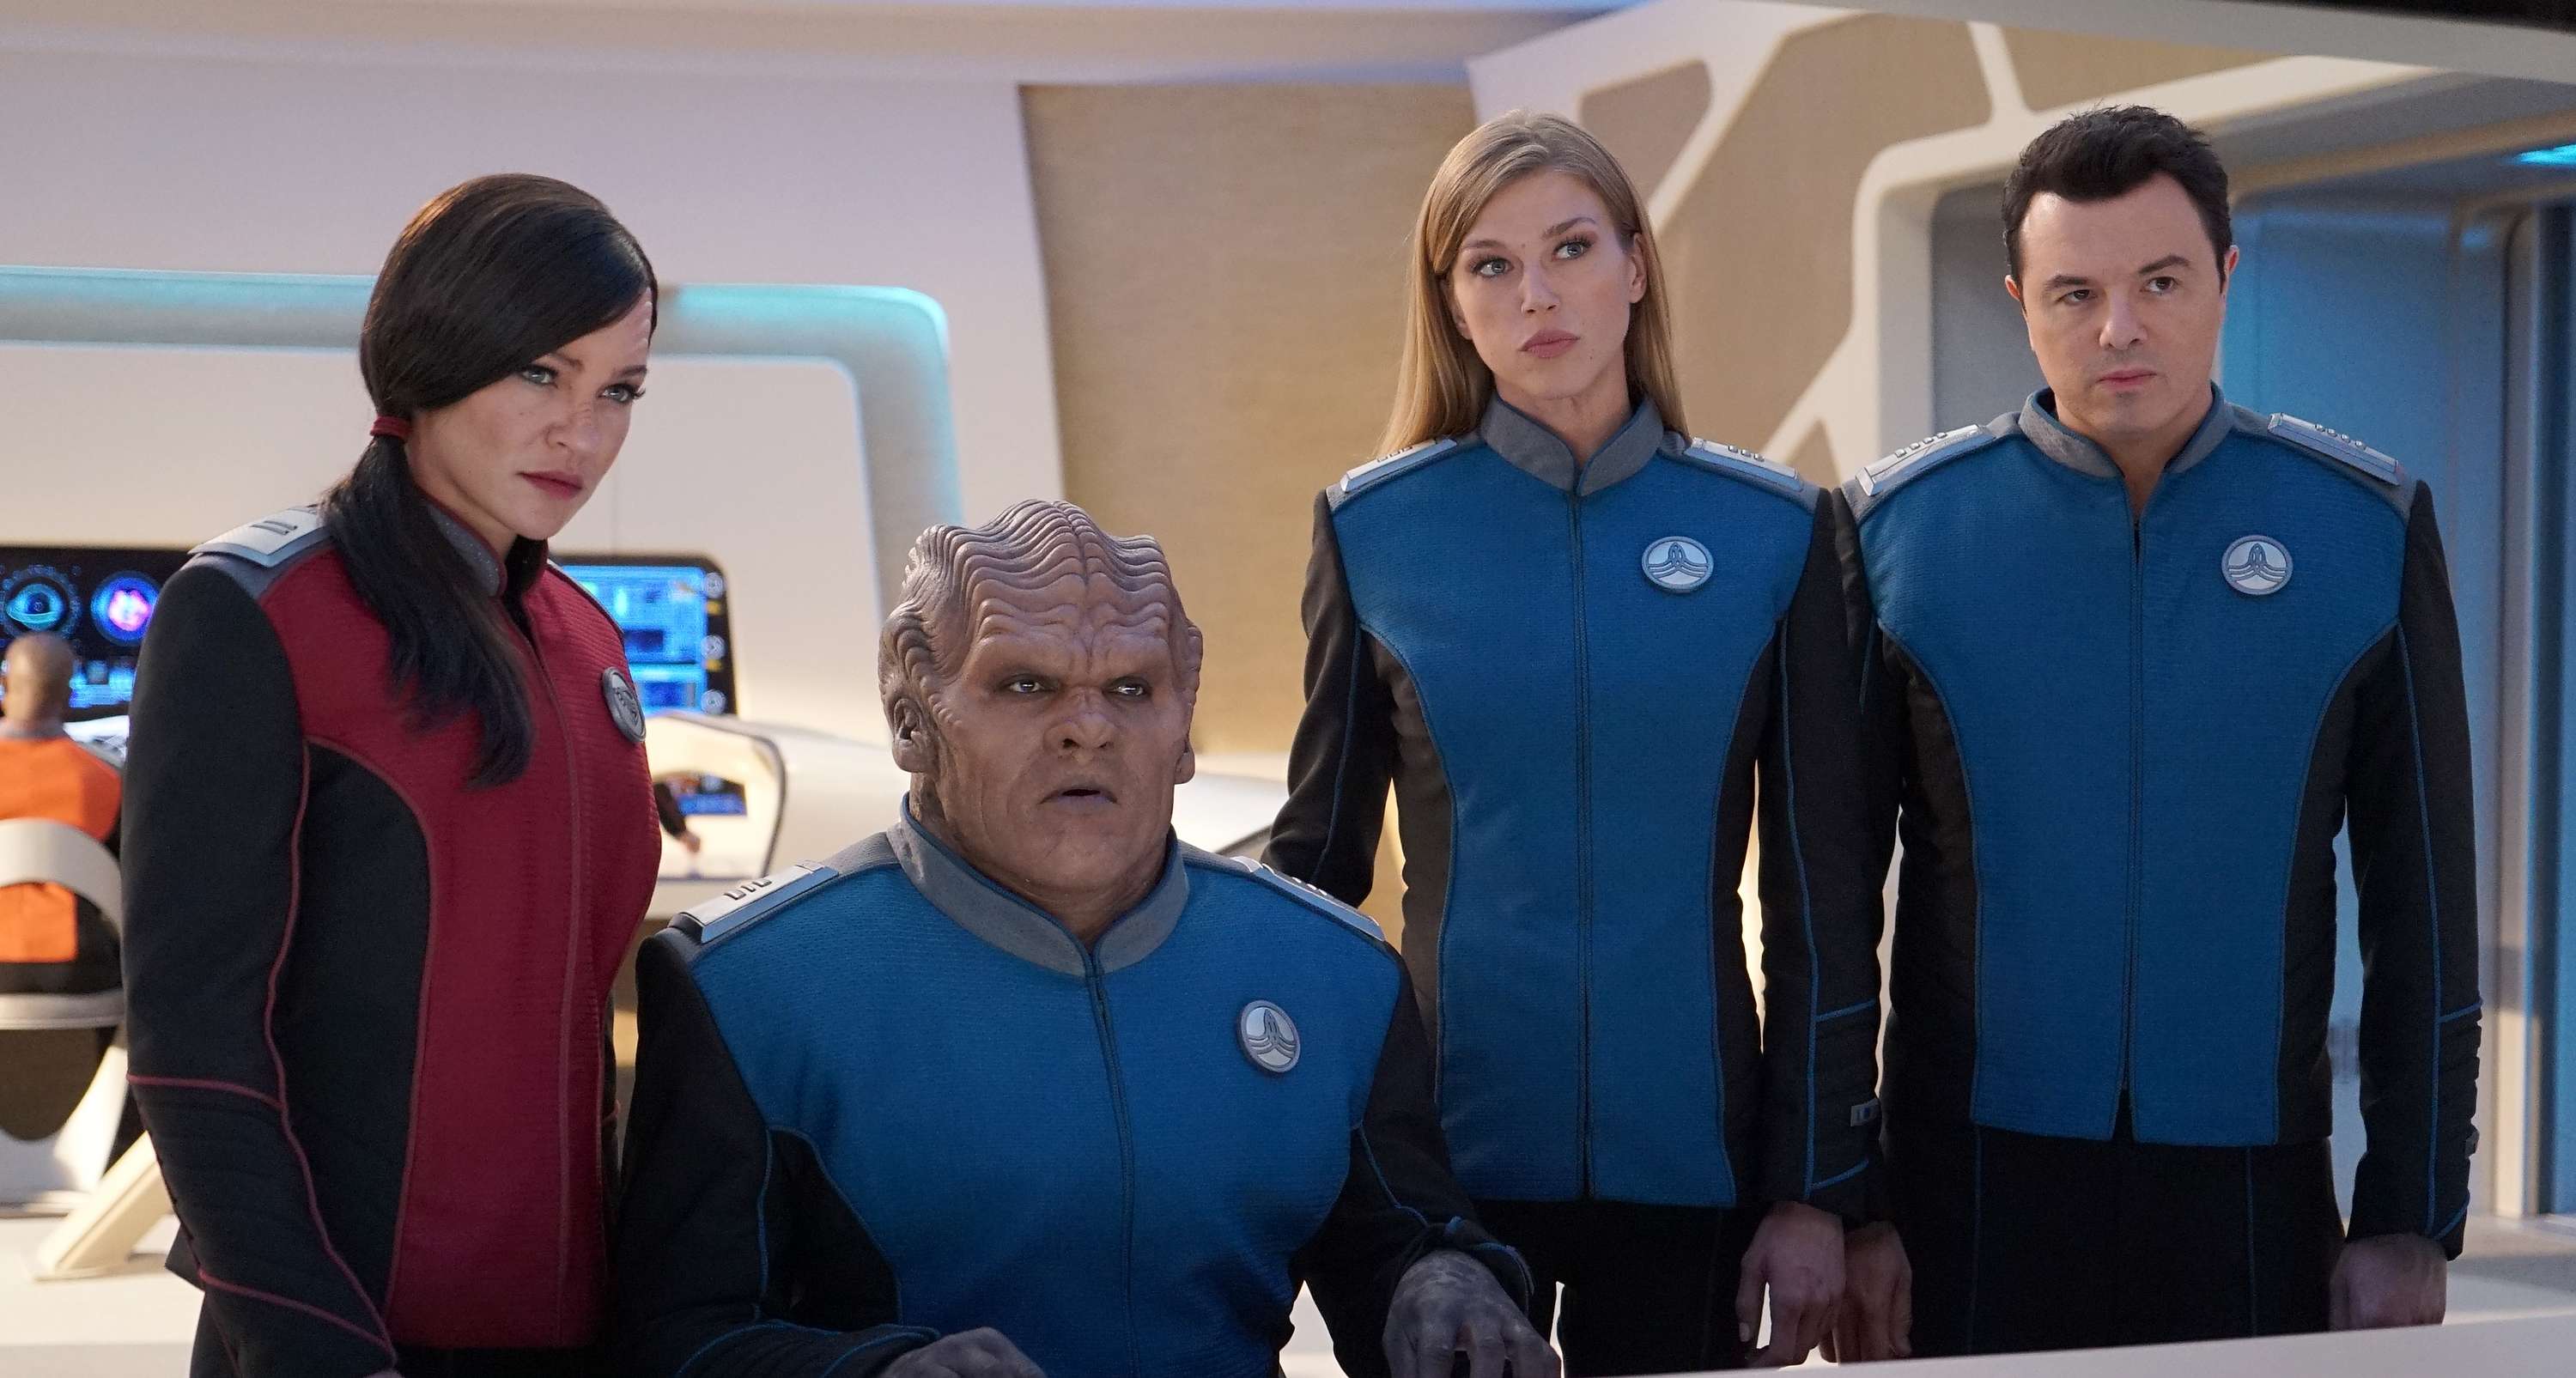 The Orville Season 3 teases 'New Horizons' in first Hulu trailer | SYFY WIRE